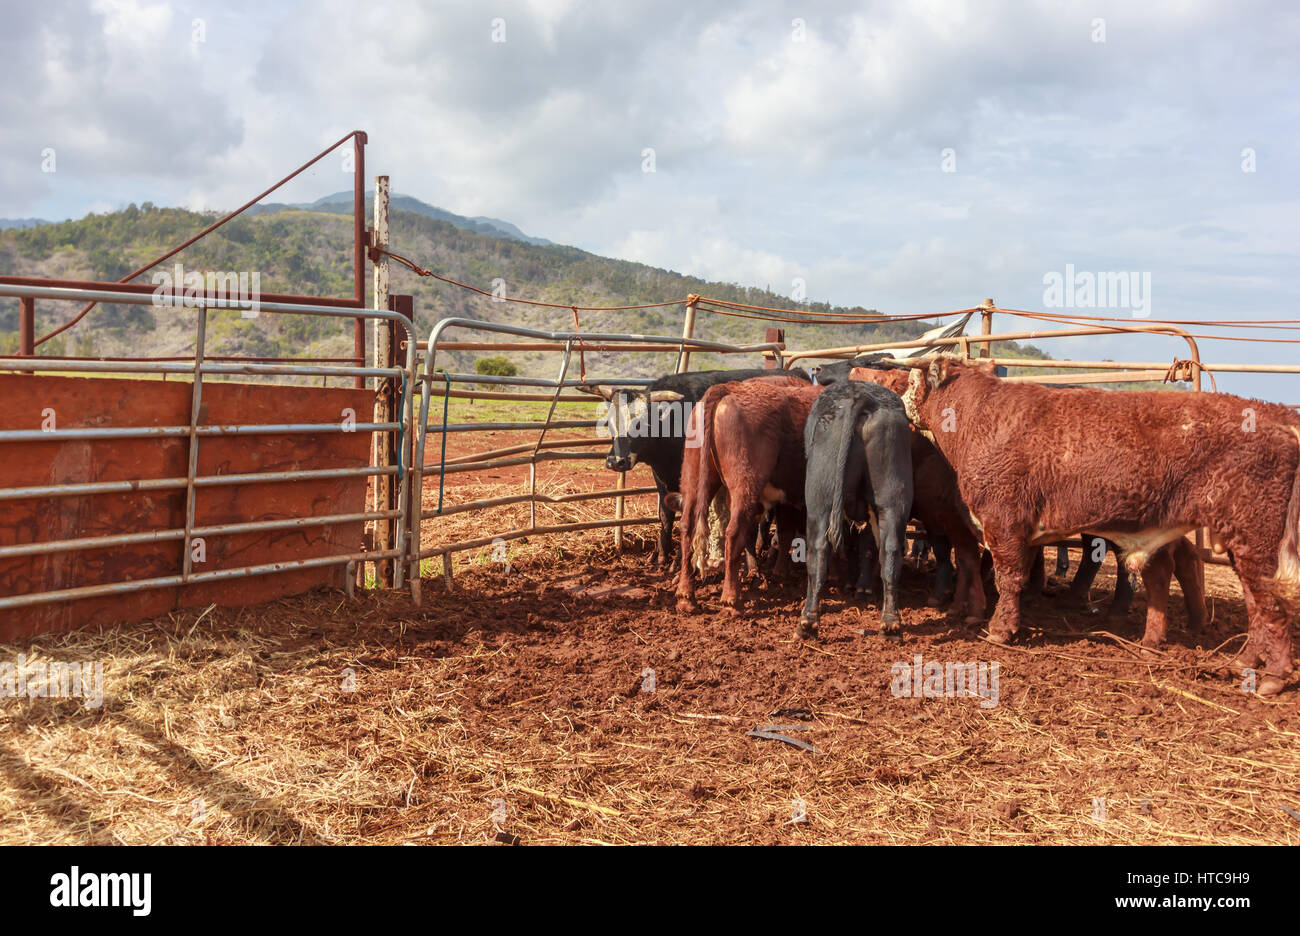 Cattle ranch view on the island of Oahu Hawaii Stock Photo